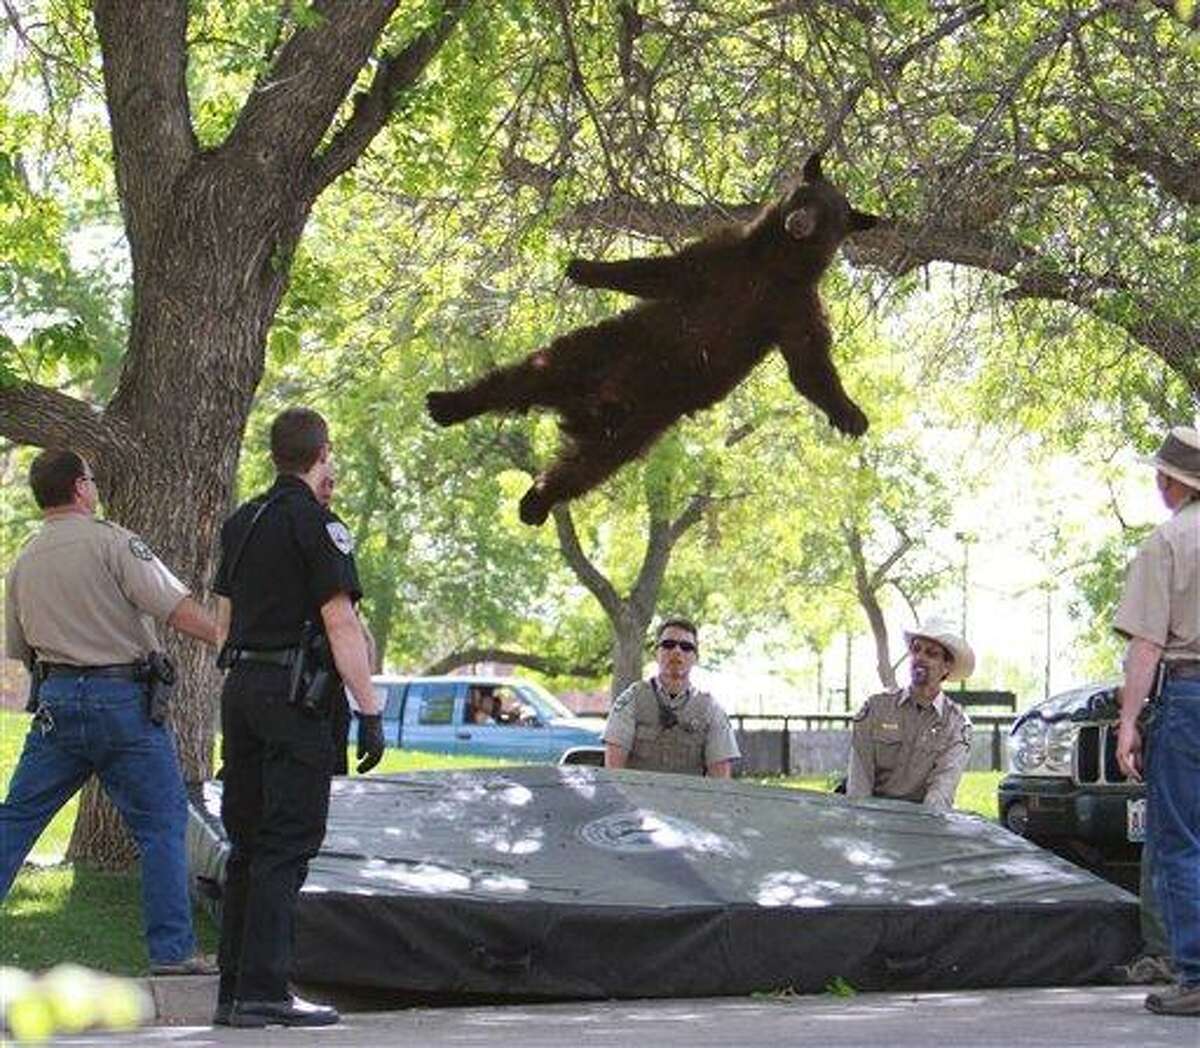 This Thursday, April 26, 2012 photo provided by the CU Independent shows a bear that wandered into the University of Colorado Boulder, Colo., dorm complex Williams Village falling from a tree after being tranquilized by Colorado wildlife officials. Colorado University police spokesman Ryan Huff said the bear was likely 1-3 years old and weighed somewhere between 150-200 pounds. (AP Photo/CU Independent, Andy Duann) MANDATORY CREDIT